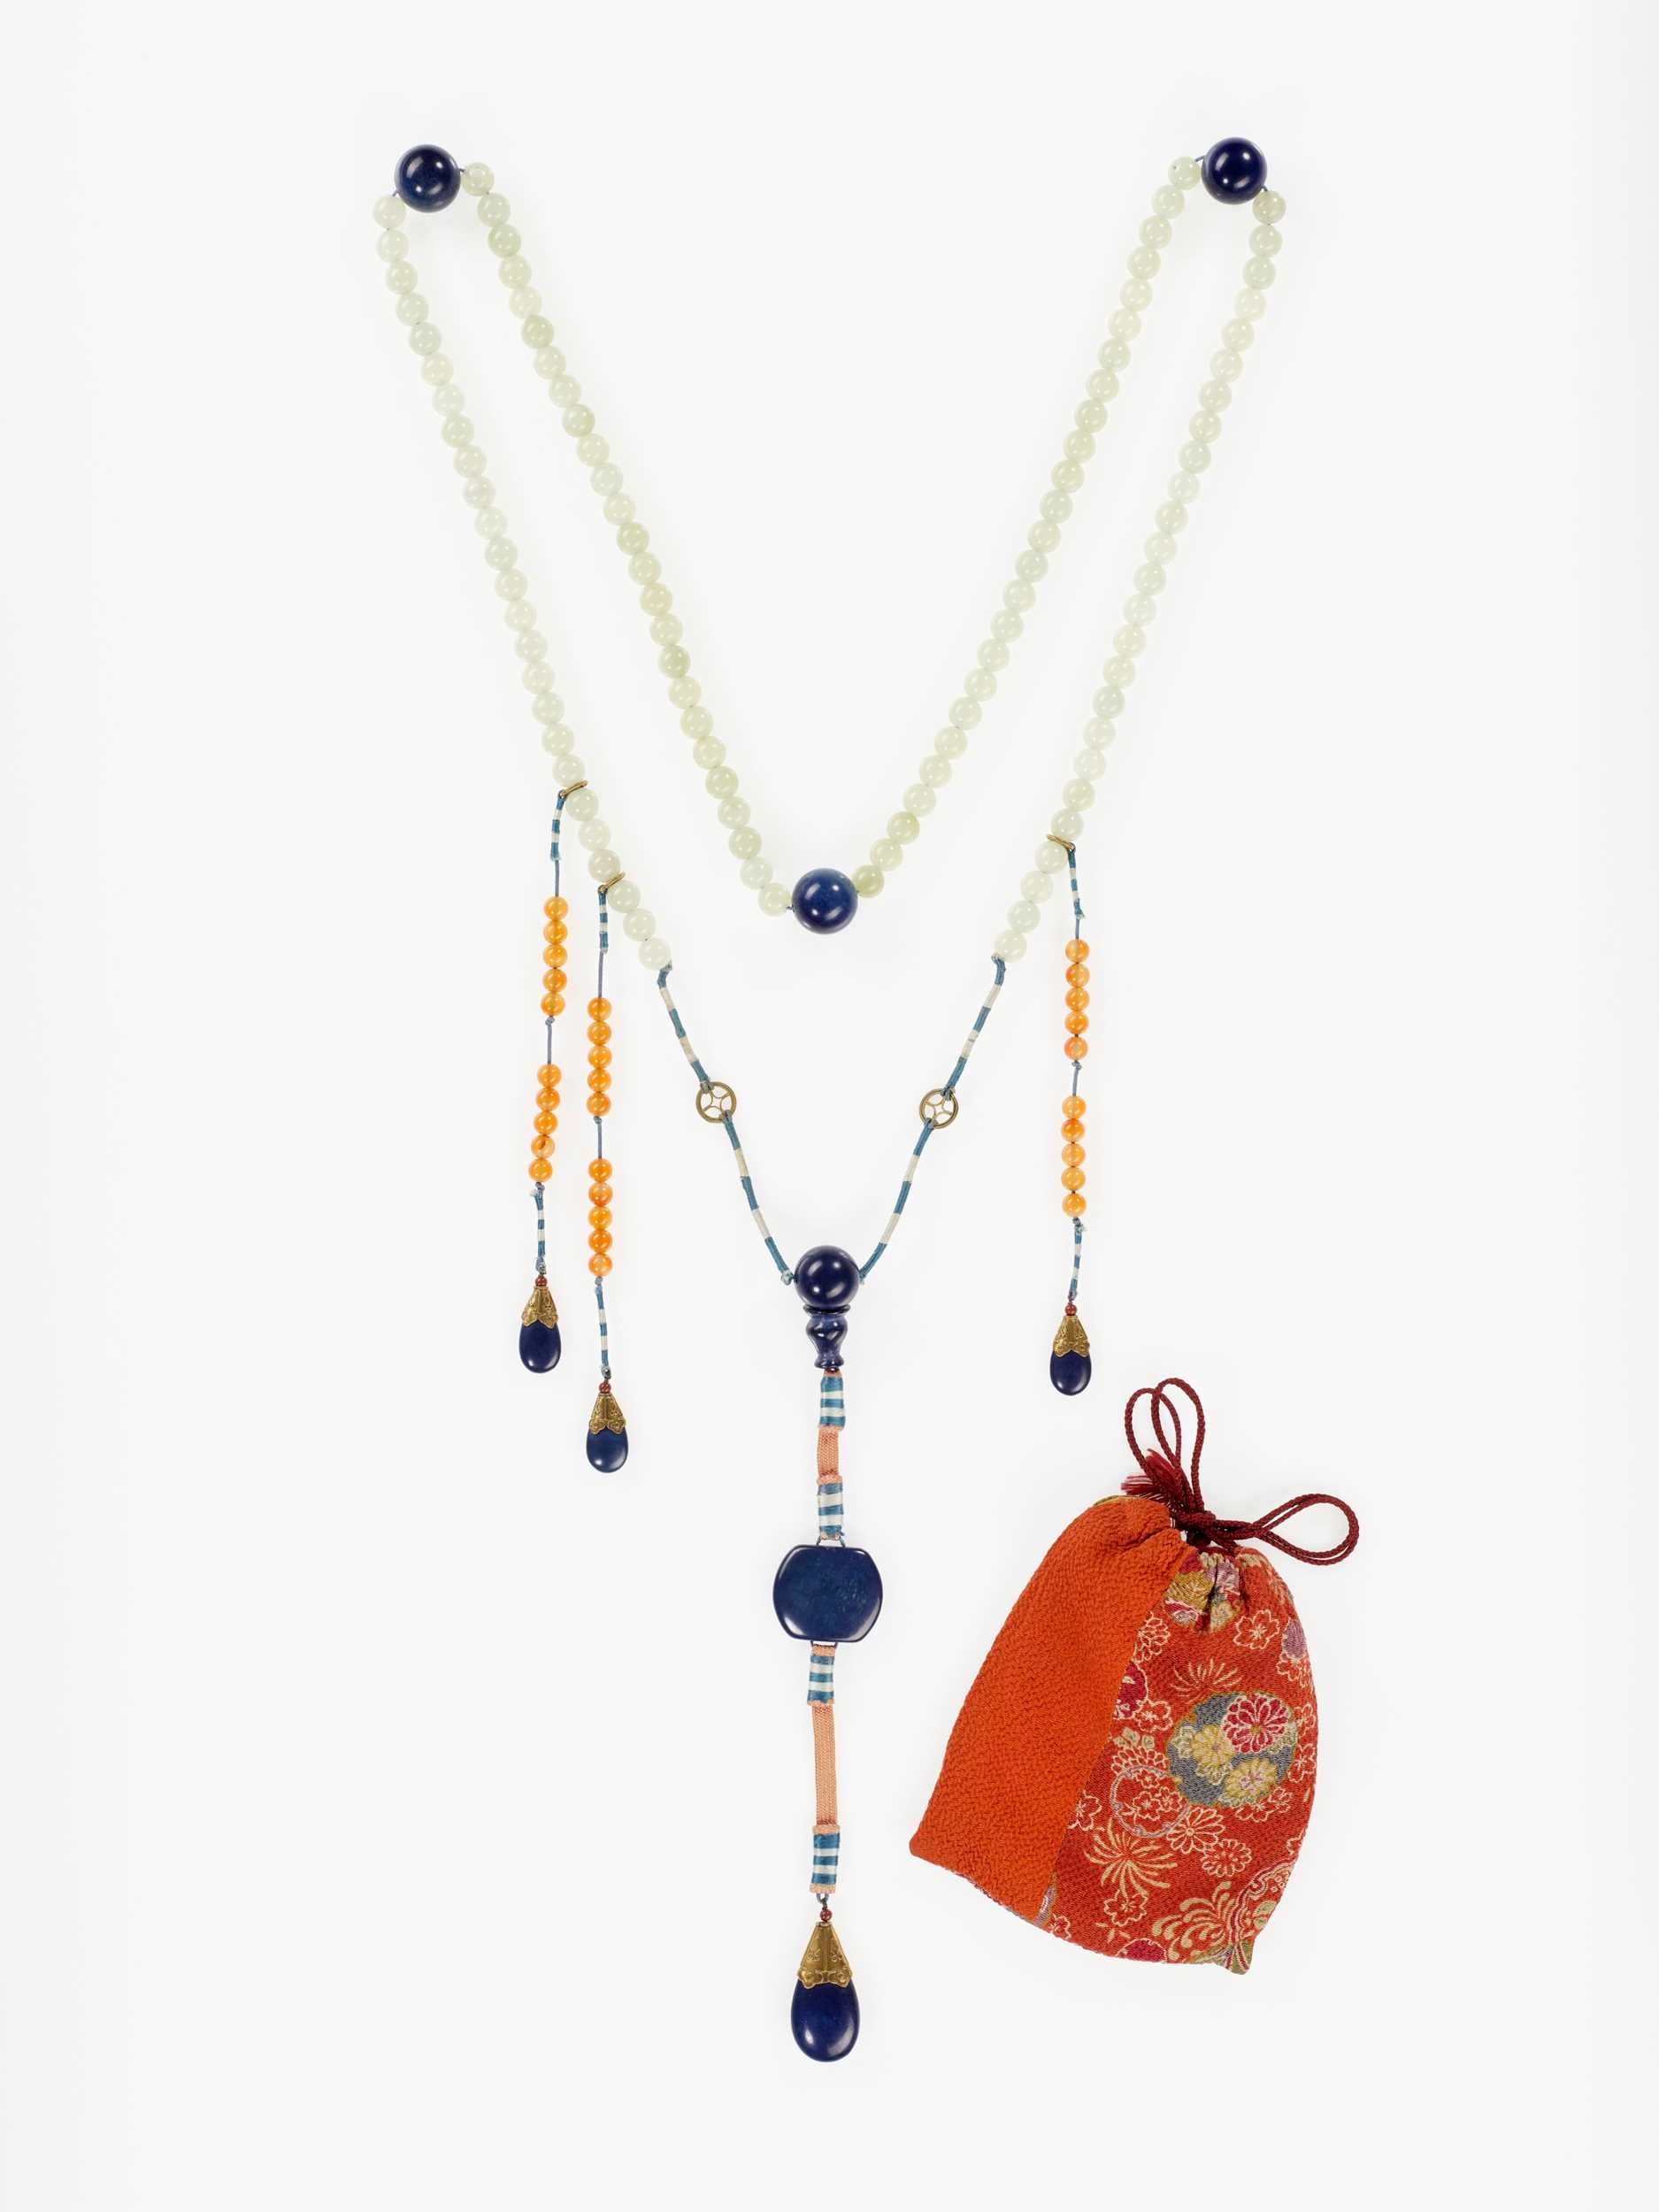 Lot 220 - A LAPIS LAZULI COURT NECKLACE, CHAOZHU, QING DYNASTY